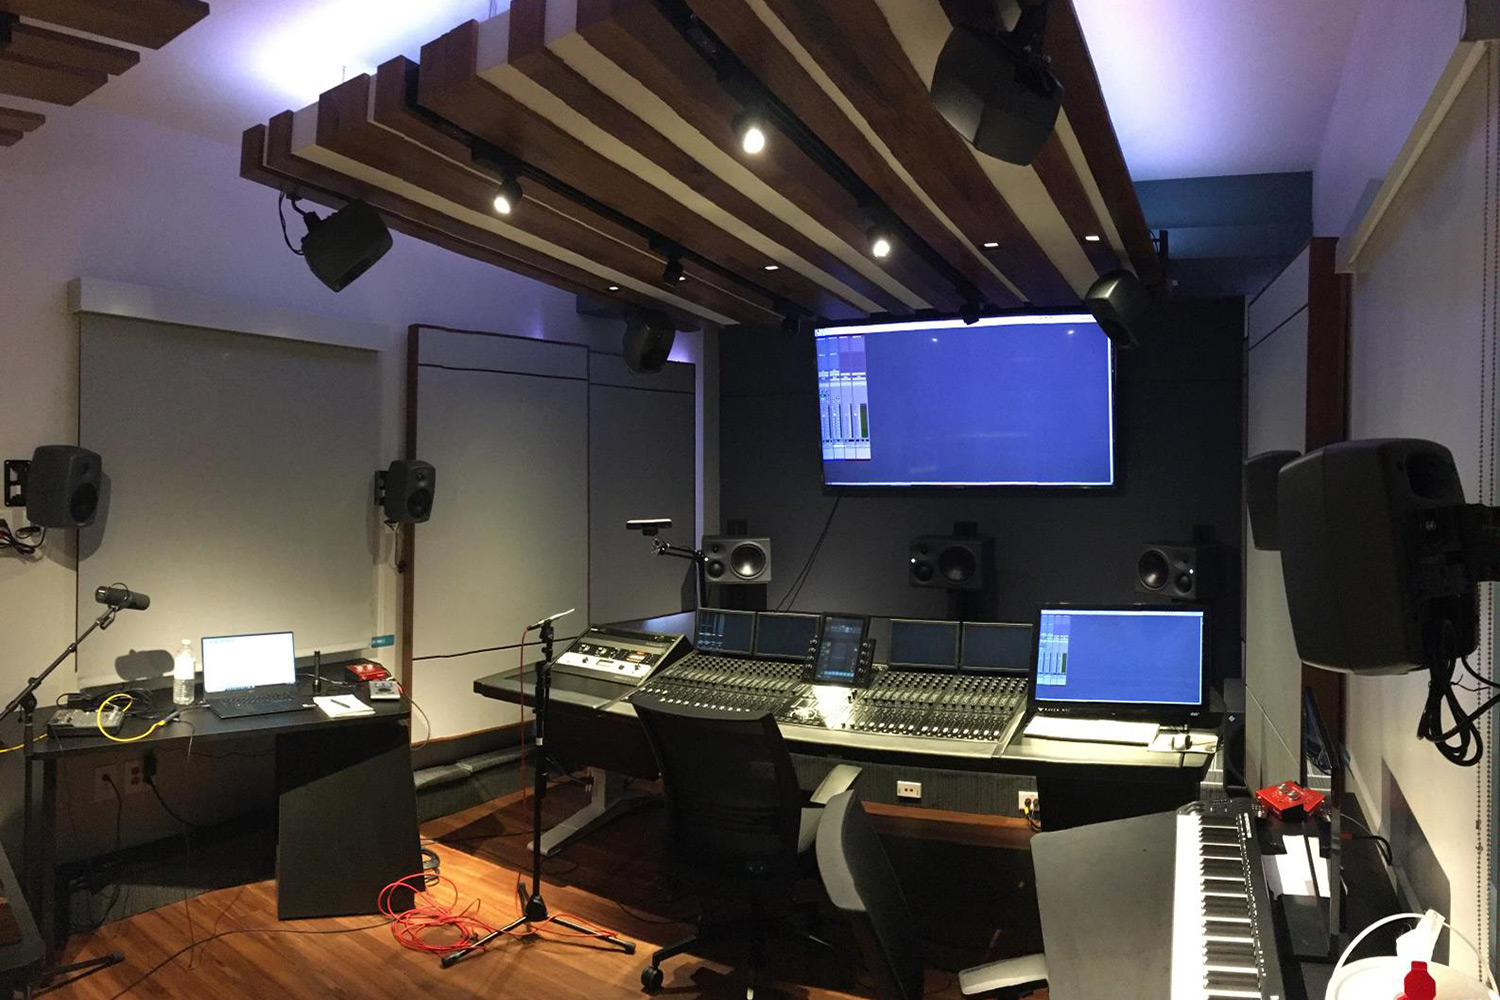 ELON University new Immersive audio control room designed by WSDG. Tuning at Control Room.